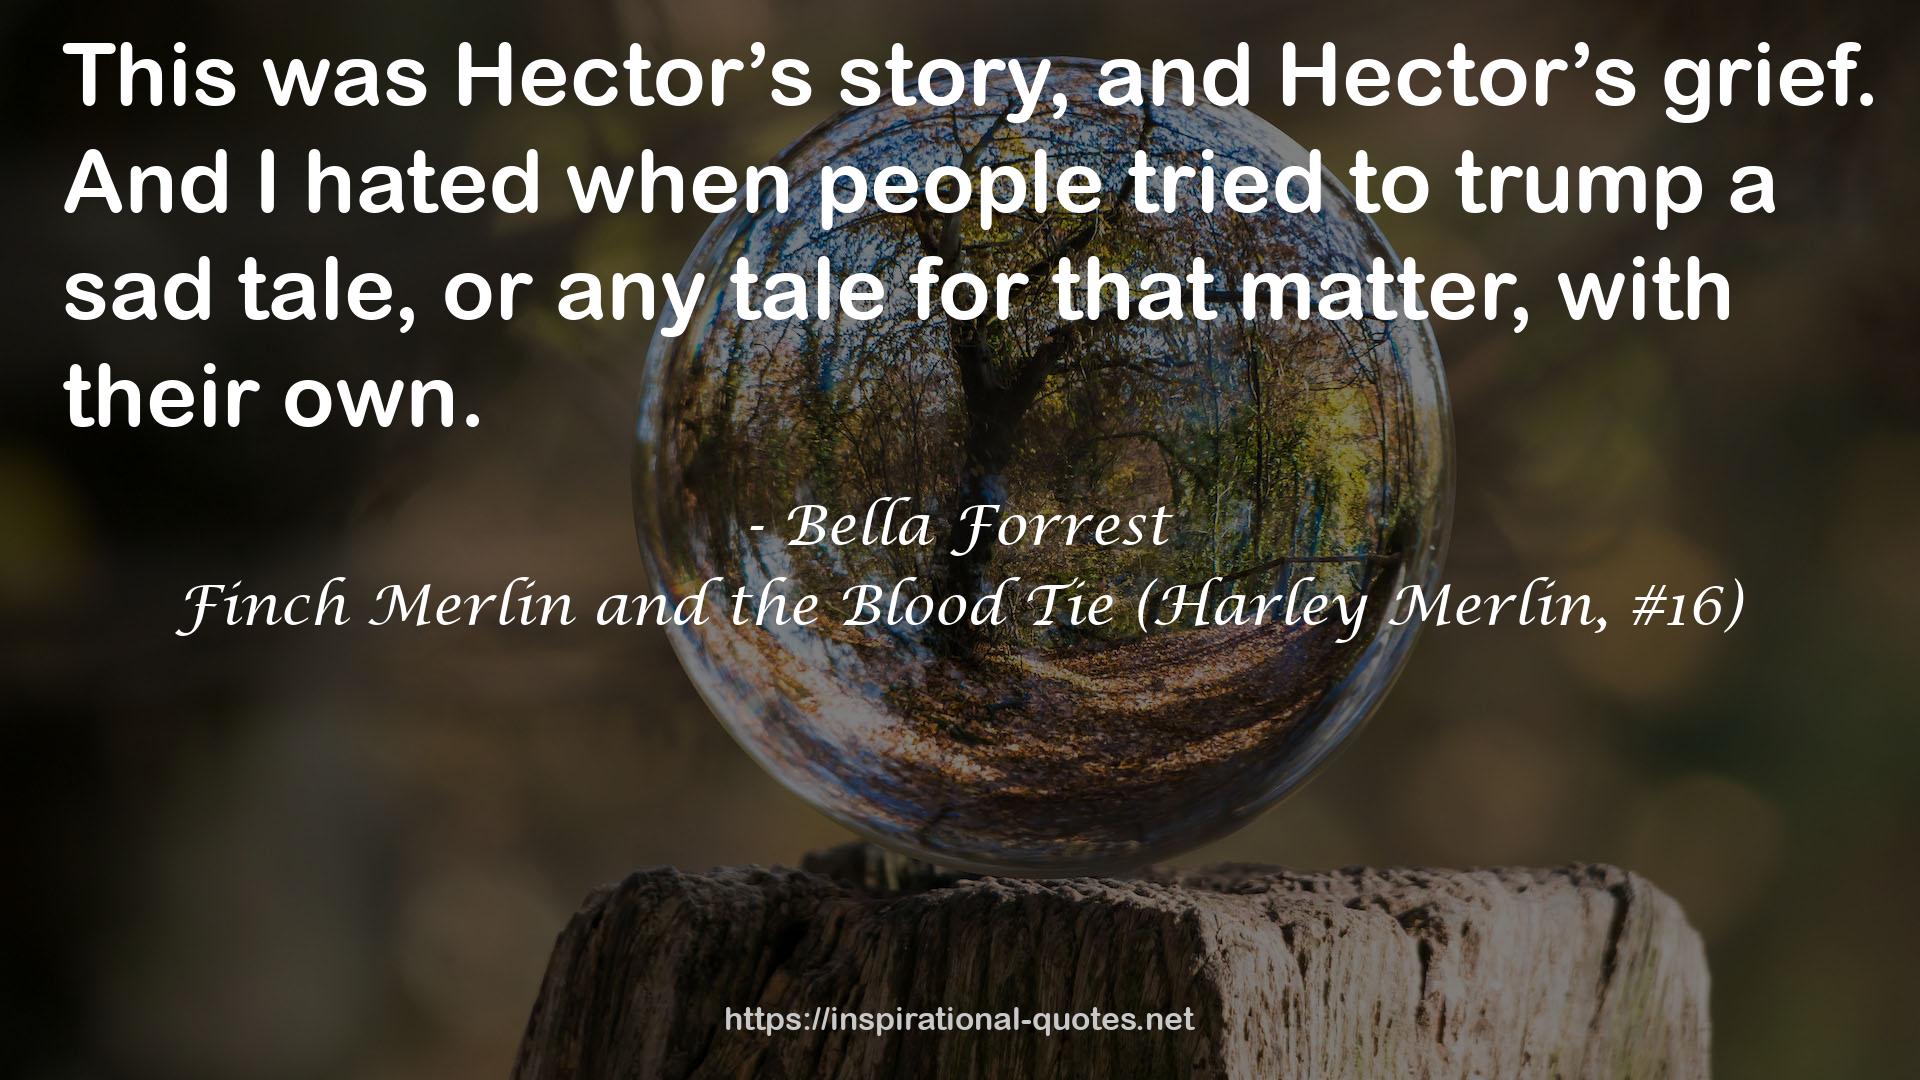 Finch Merlin and the Blood Tie (Harley Merlin, #16) QUOTES